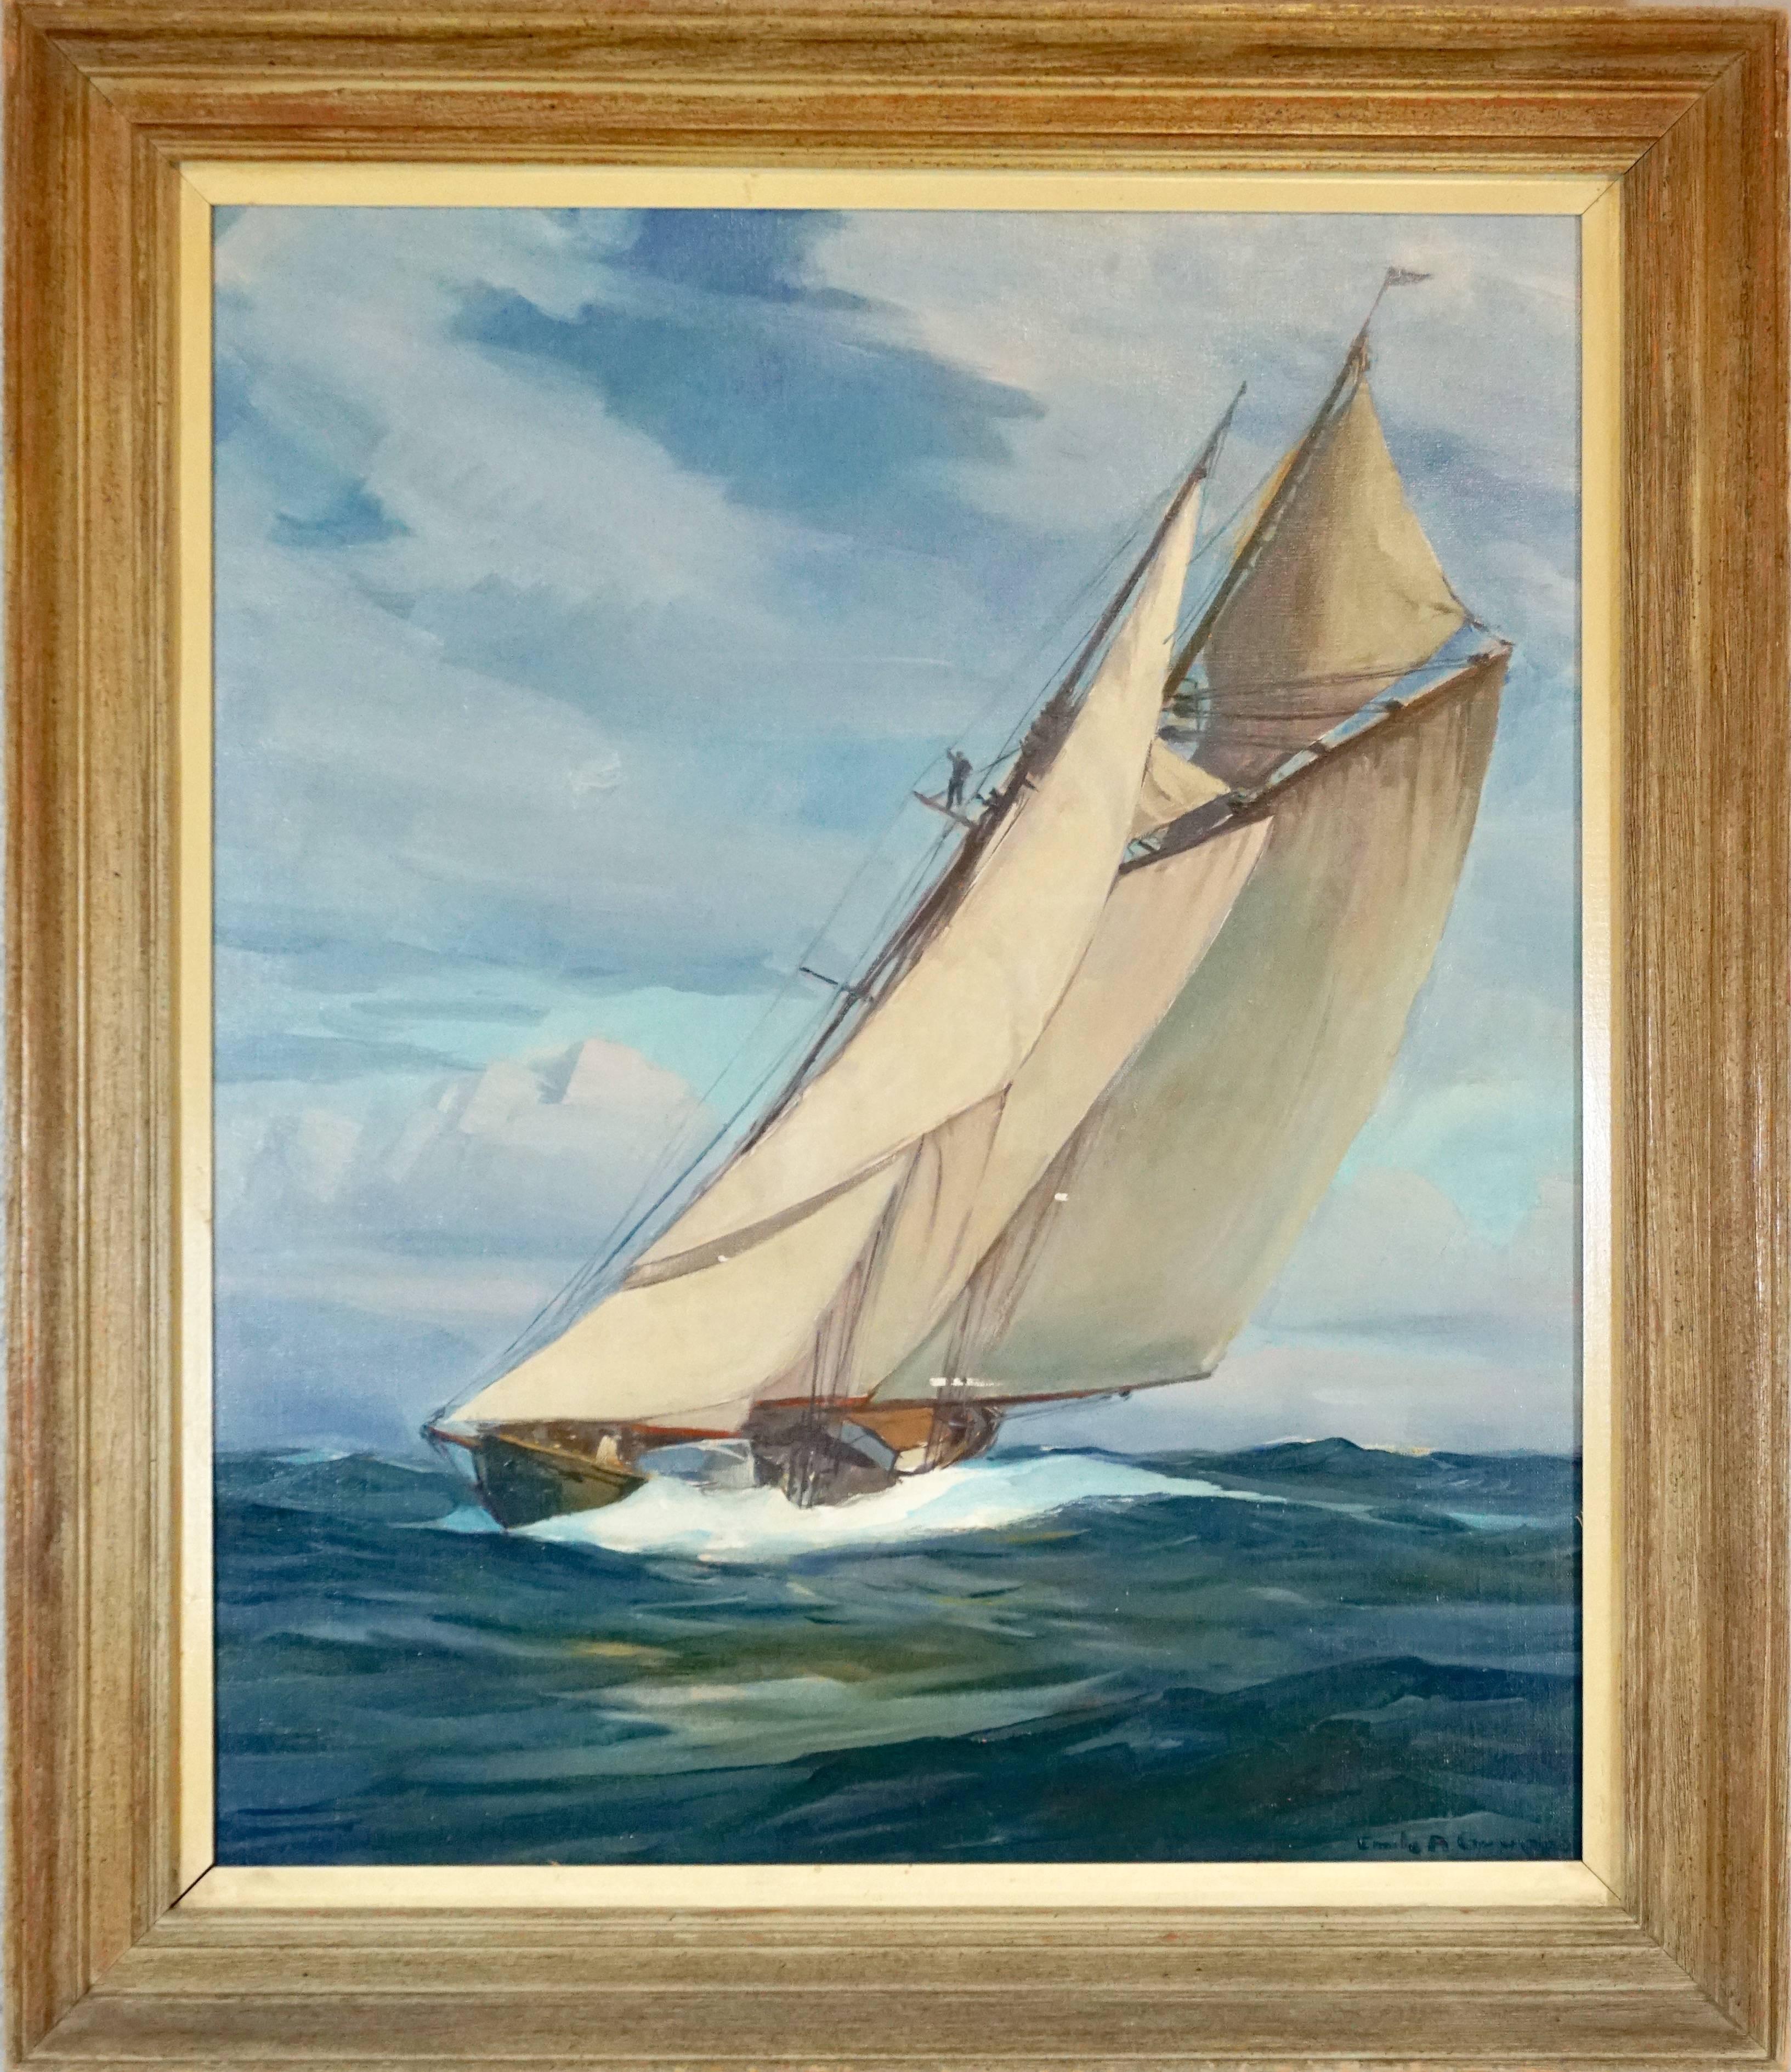 Emile Albert Gruppe "The Henry Ford Schooner" Early painting of Gloucesters most famous fishing and racing schooner.

Oil on canvas

Measures: Canvas 25-30 inches
Frame 31-36 inches

Condition: Excellent. Unlined. No cracking,